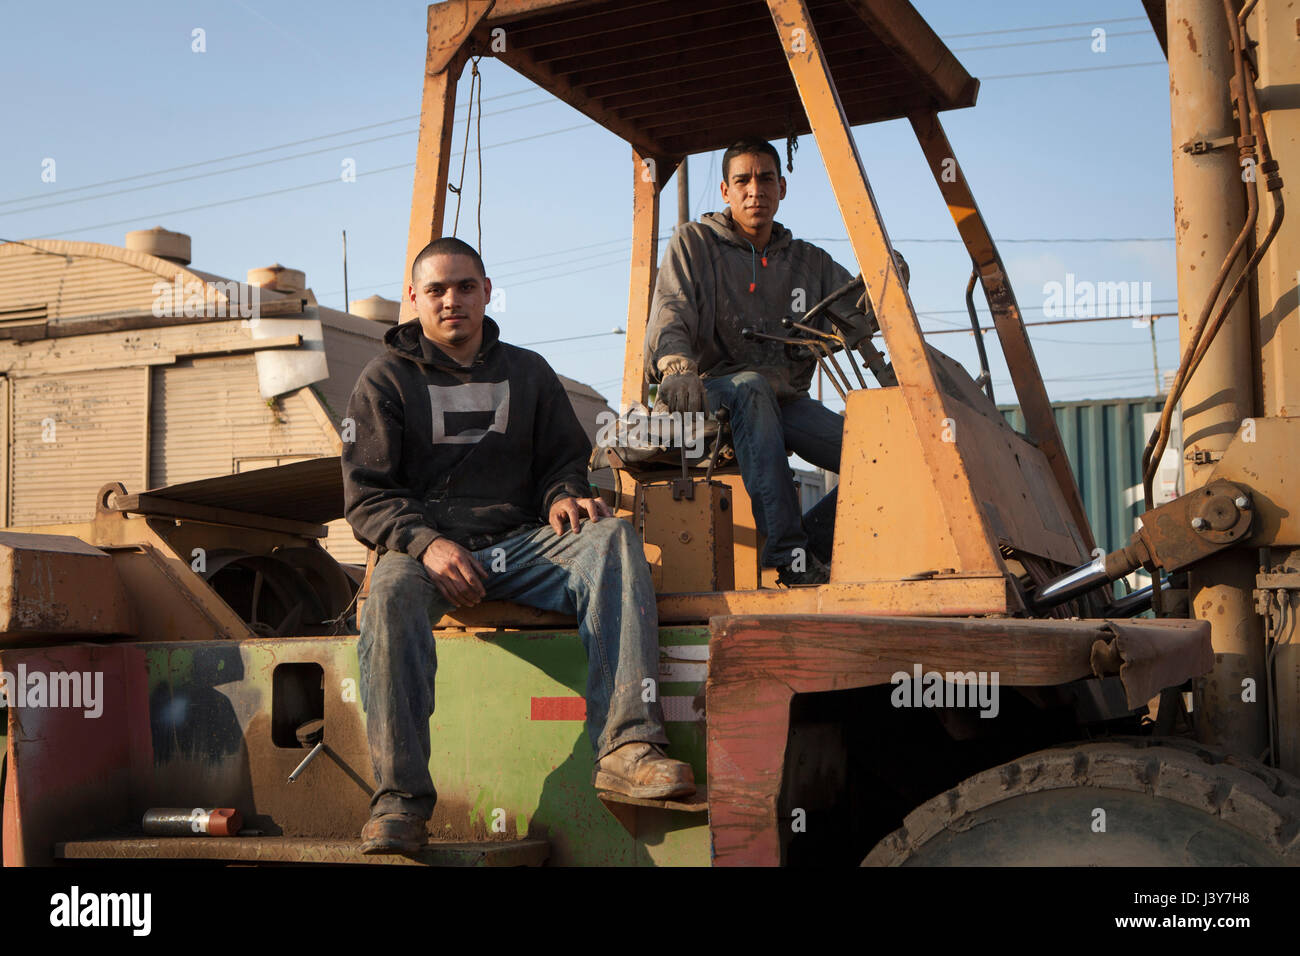 Colleagues on construction site sitting on heavy machinery Stock Photo